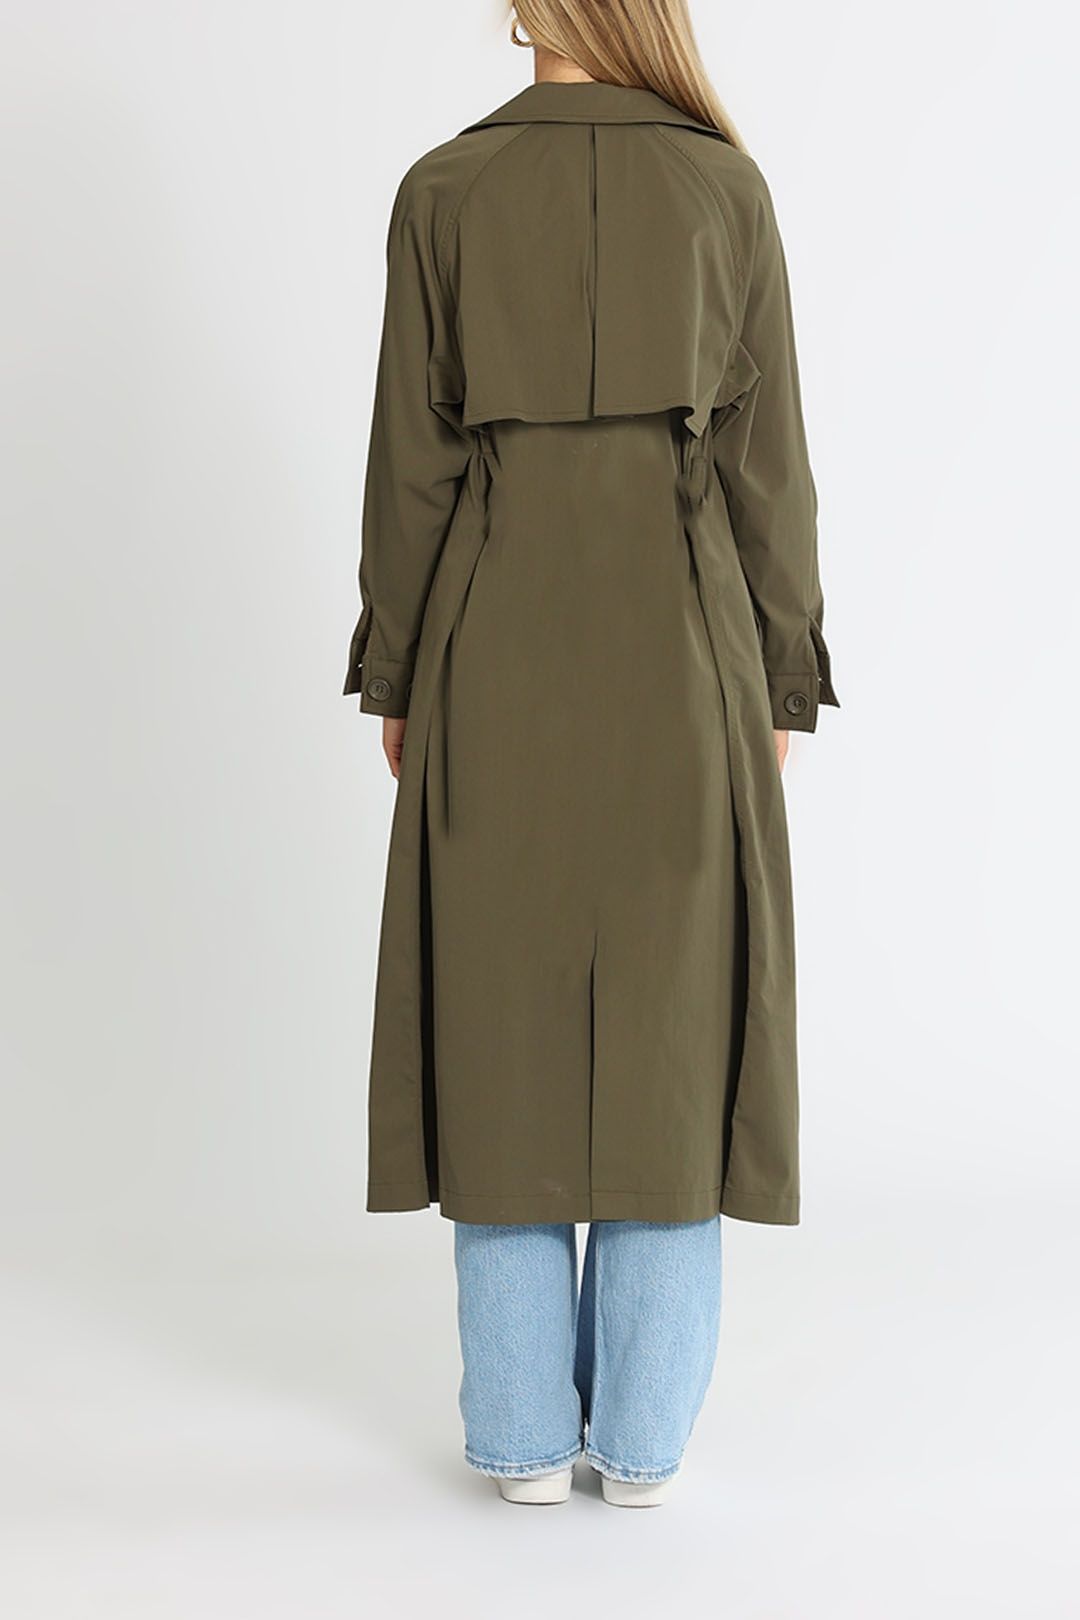 Ena Pelly Mila Twill Trench Khaki Relaxed Fit